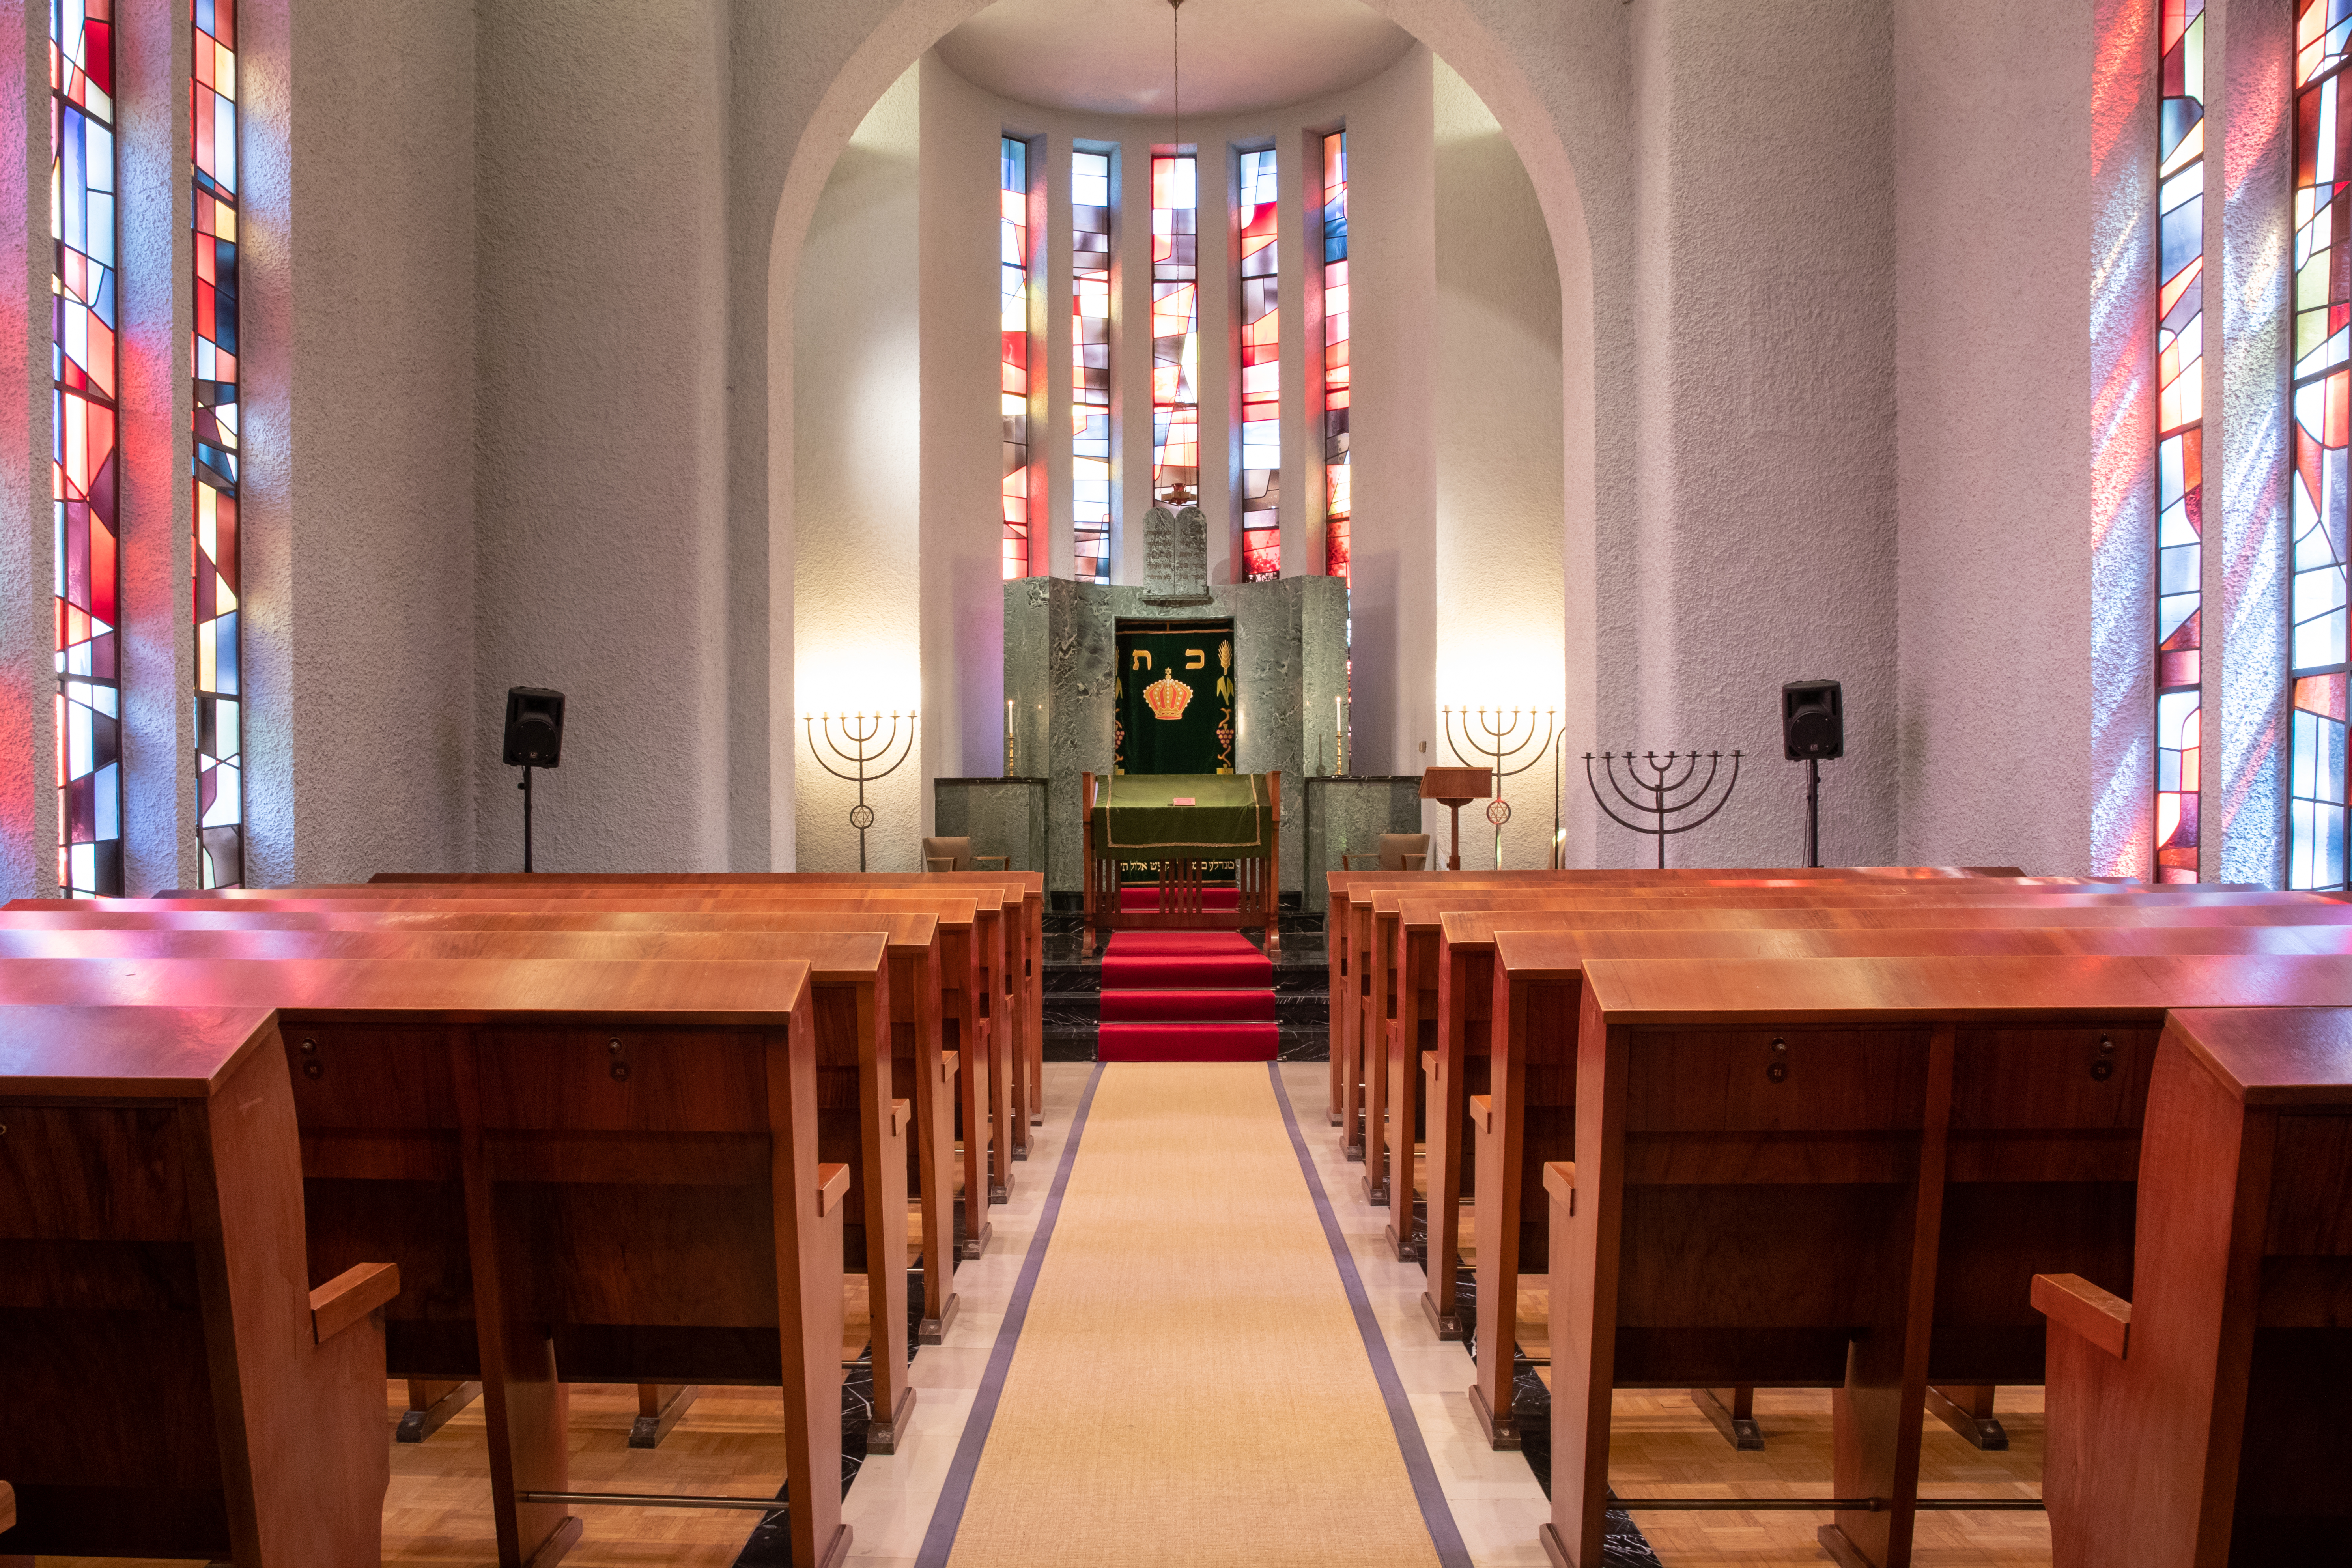 The inside of a synagogue.